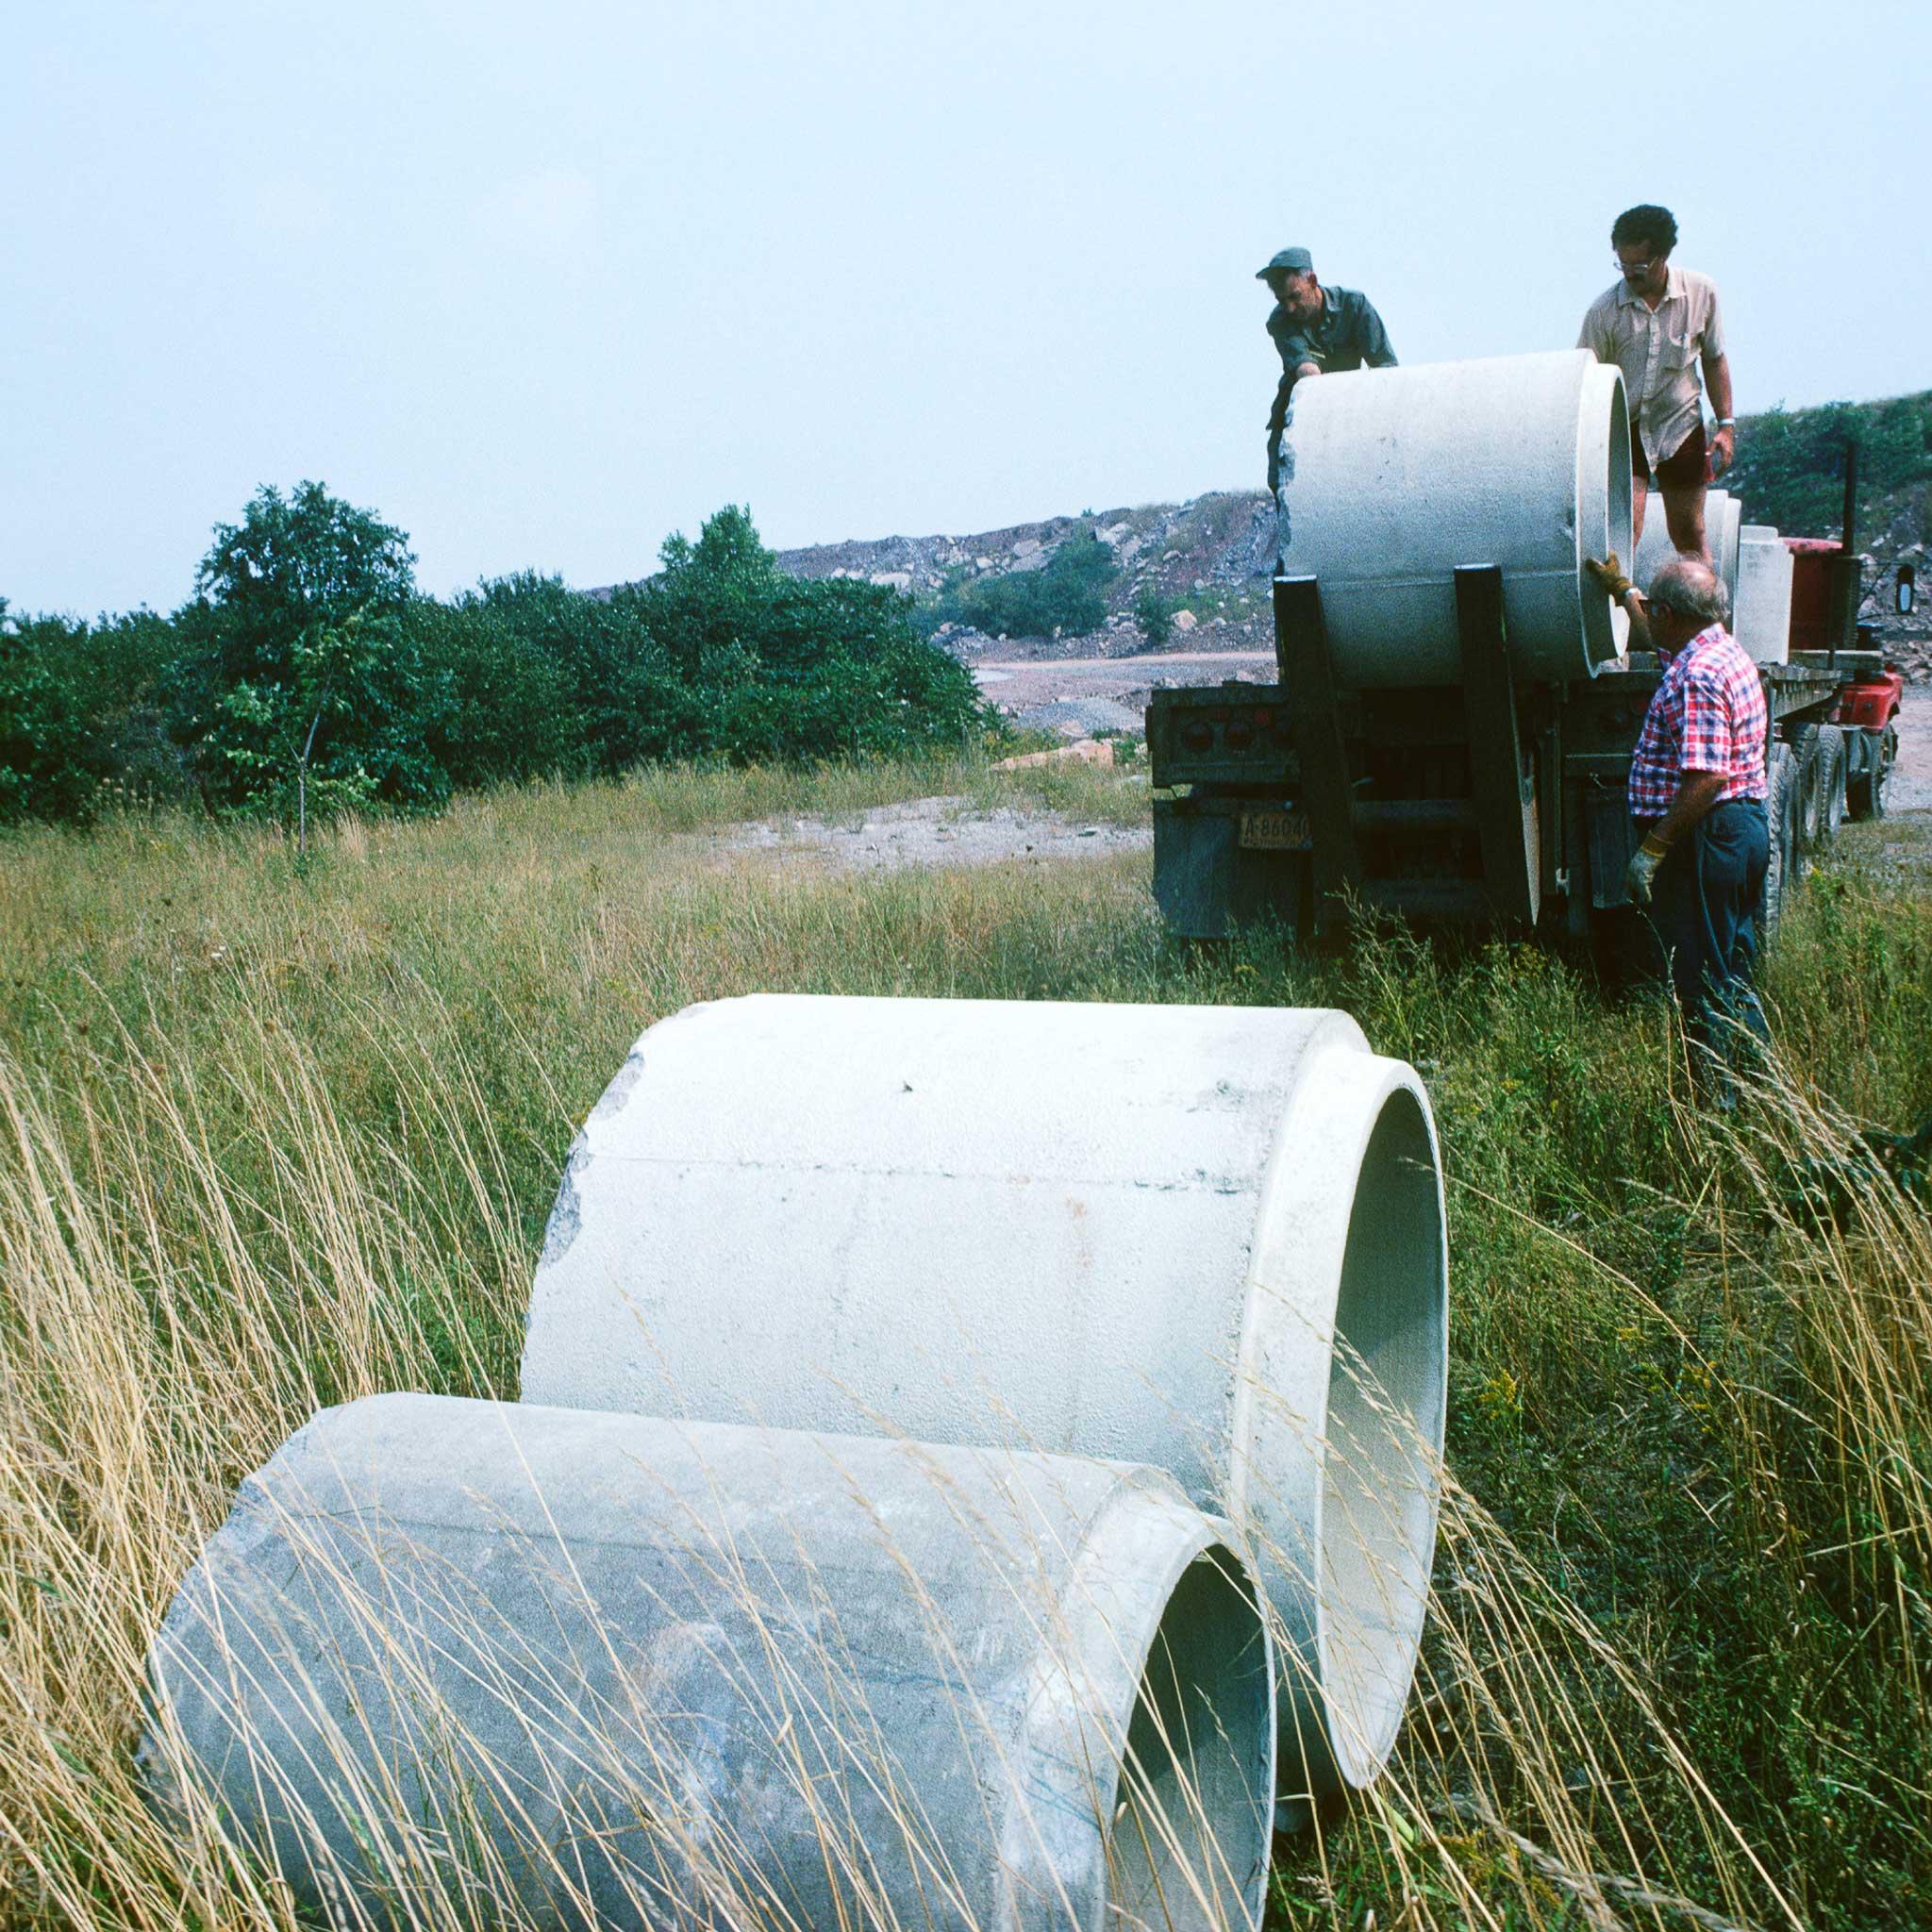 Two large concrete tubes in a field and a third on a front loader machine with three figures around it.